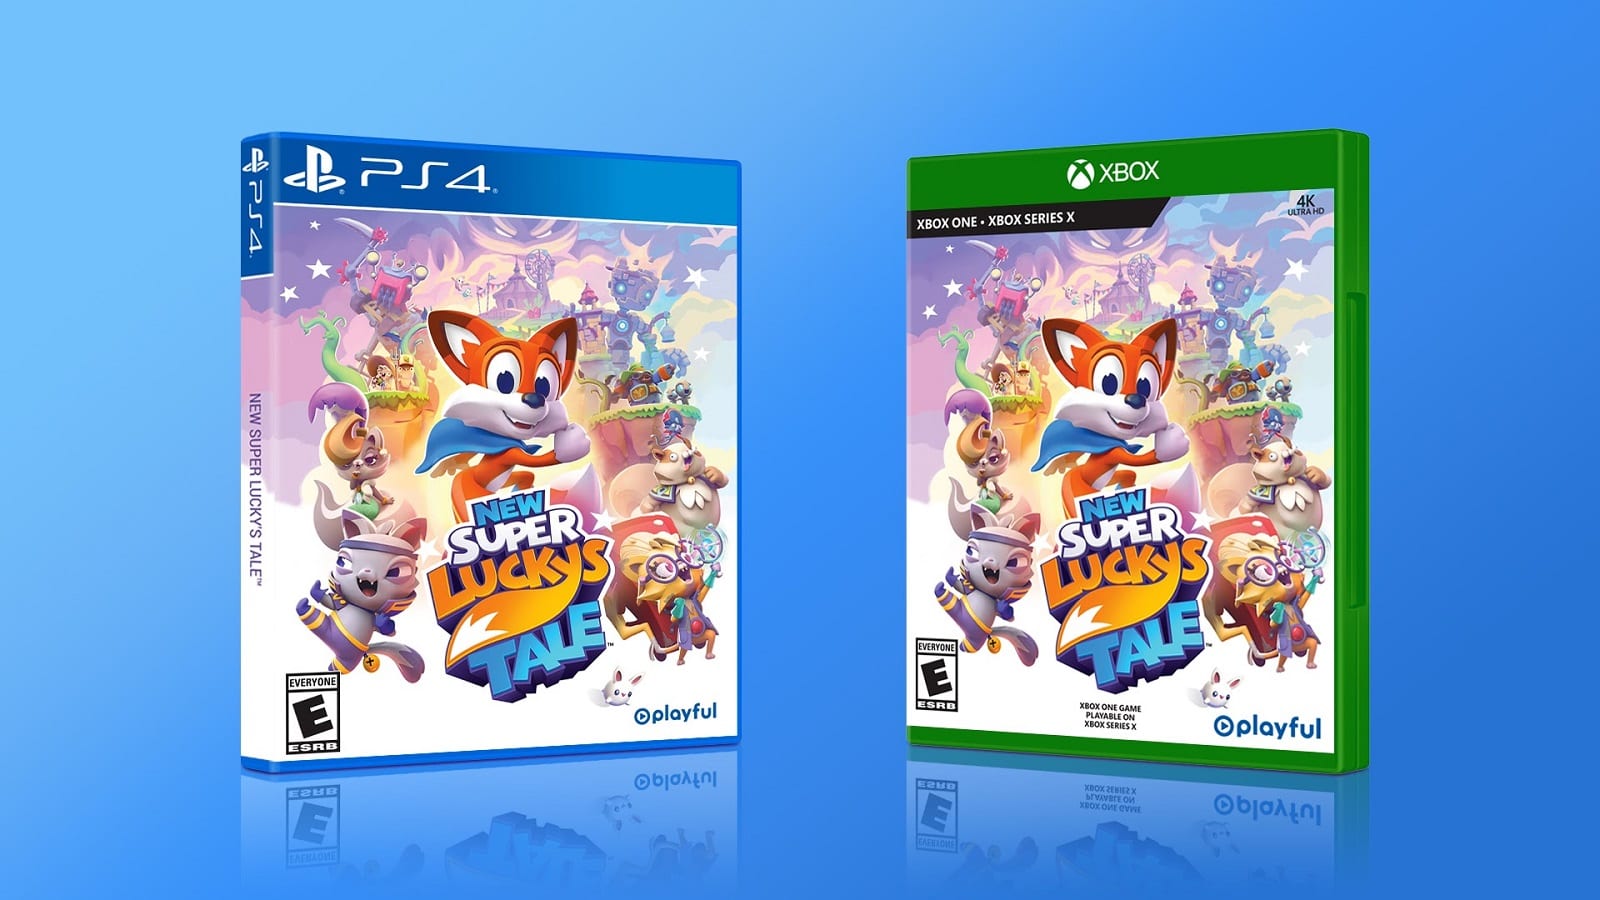 Lucky's Tale franchise surpasses 3 million users, PS4 and Xbox One